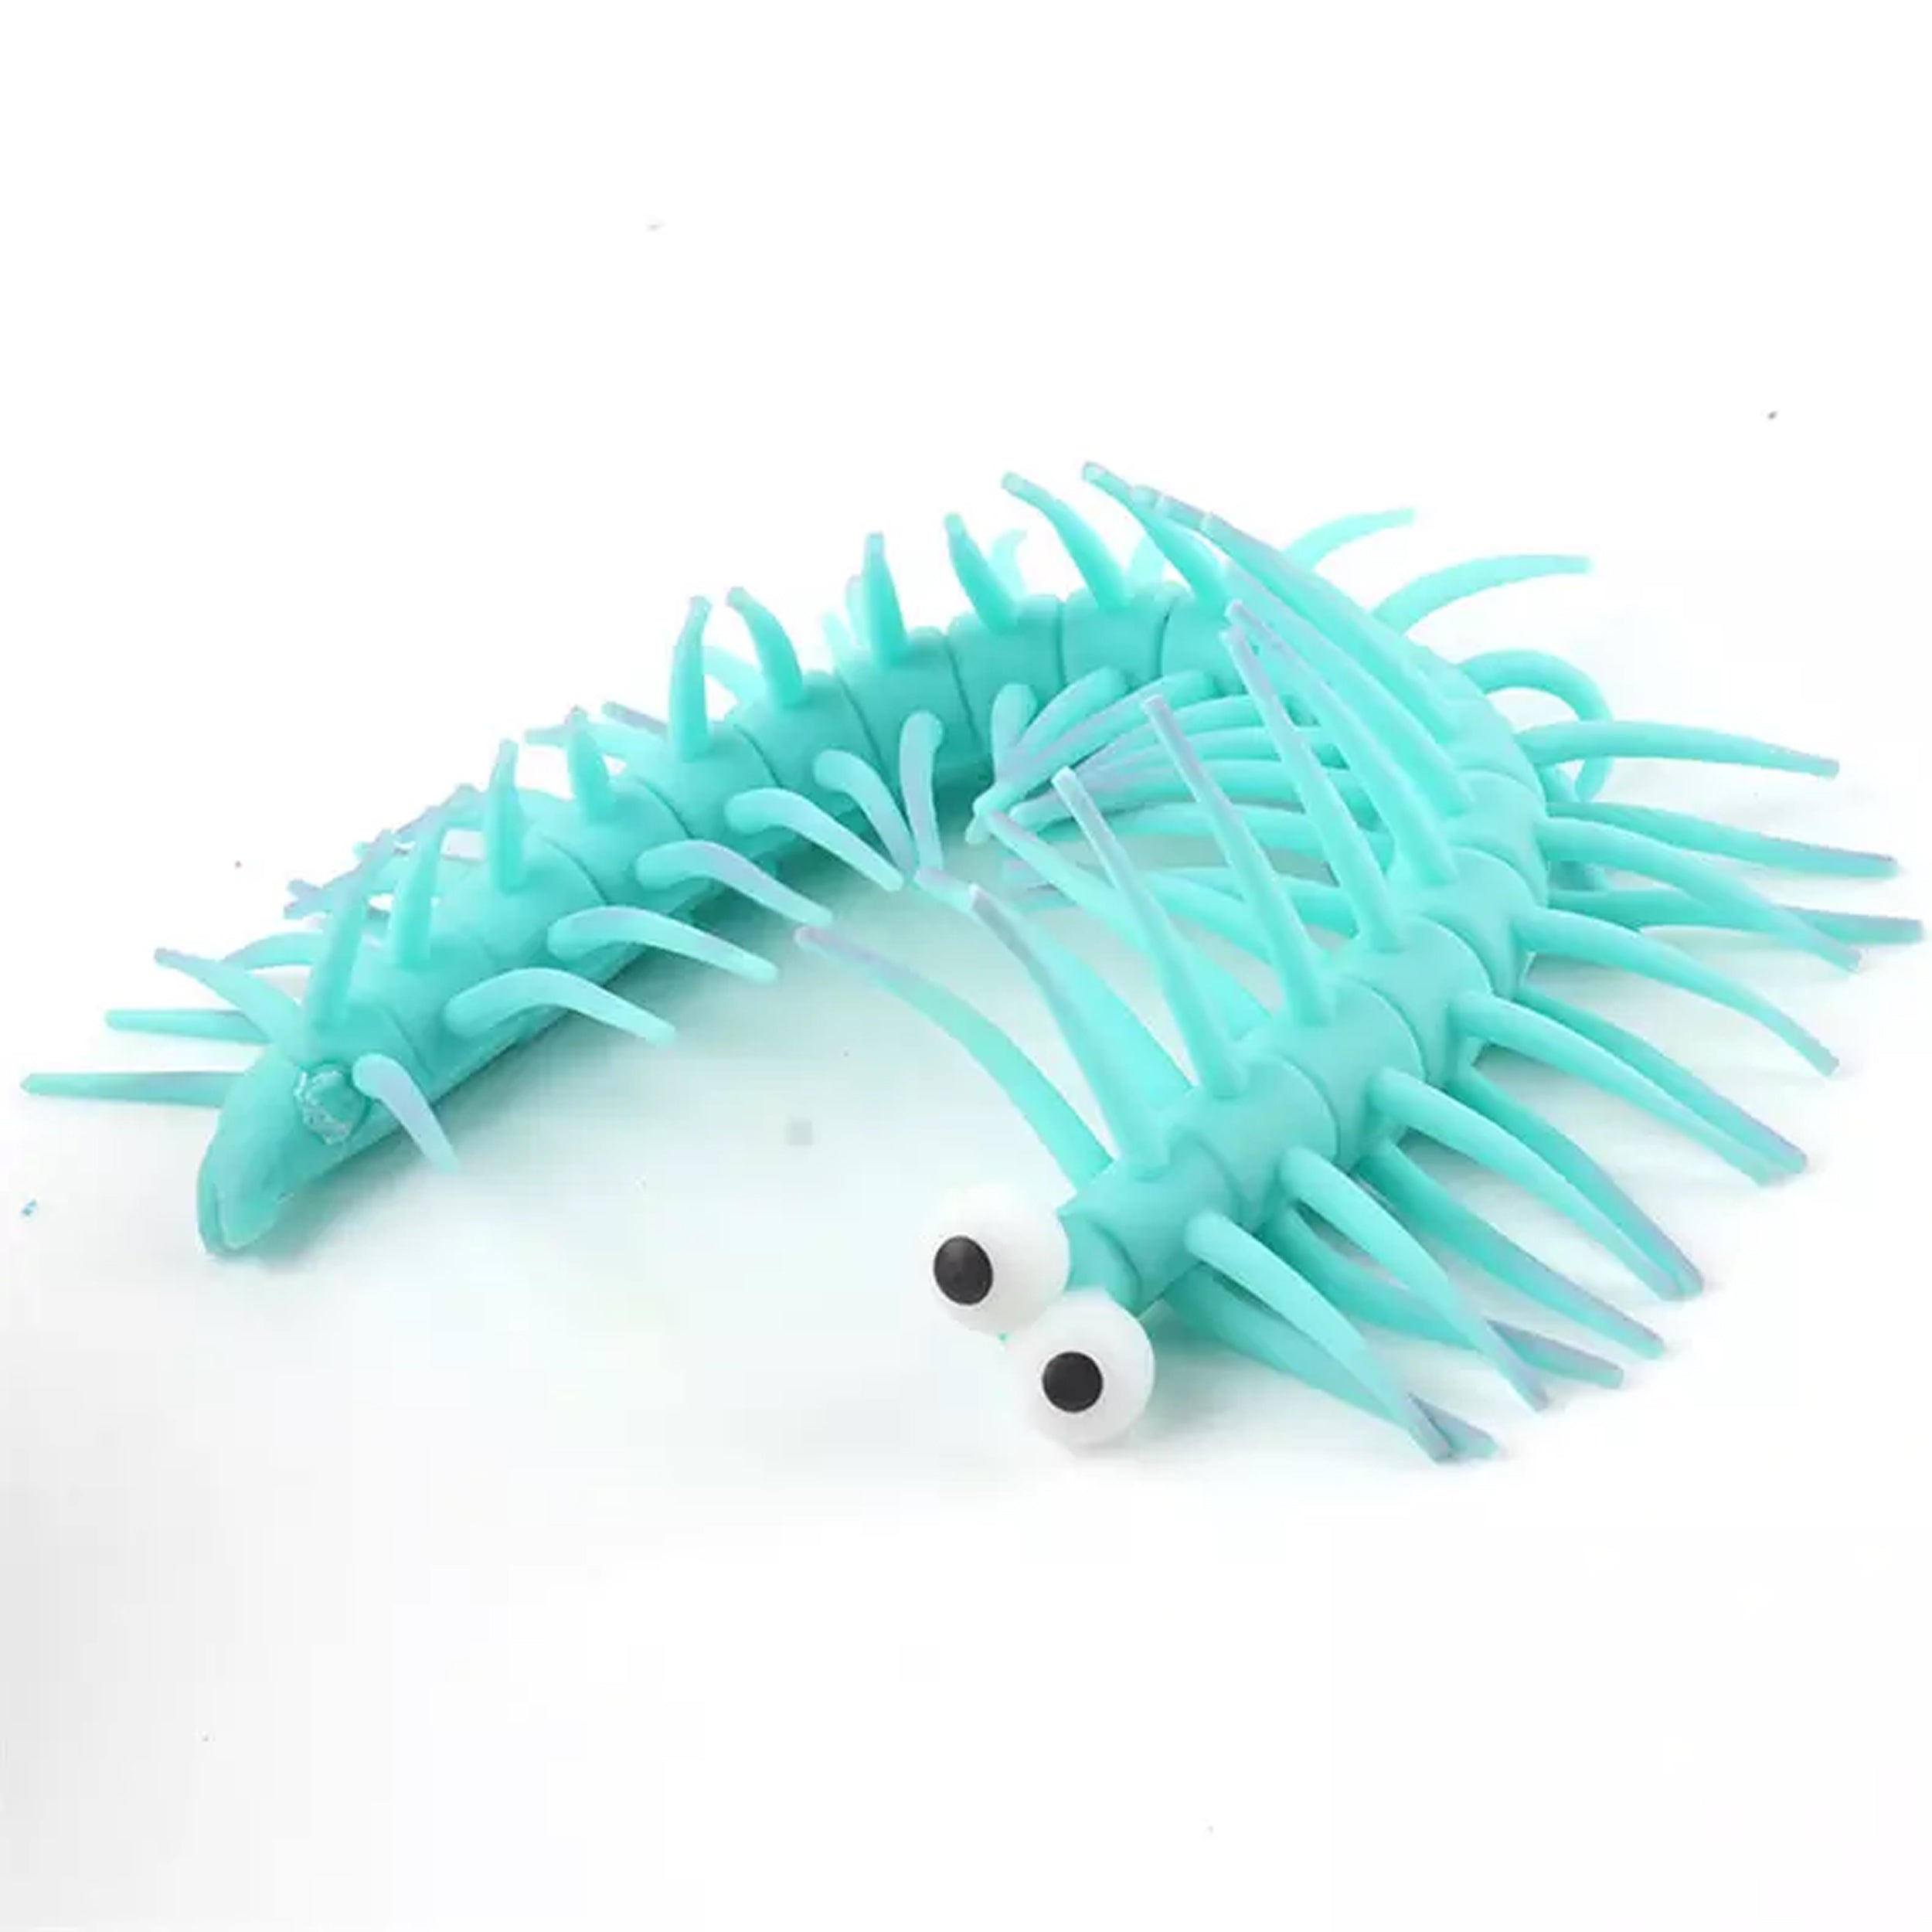 Stretchy String Stress Relief Toy - Centipede - Fun and Relaxing Sensory Fidget Toy